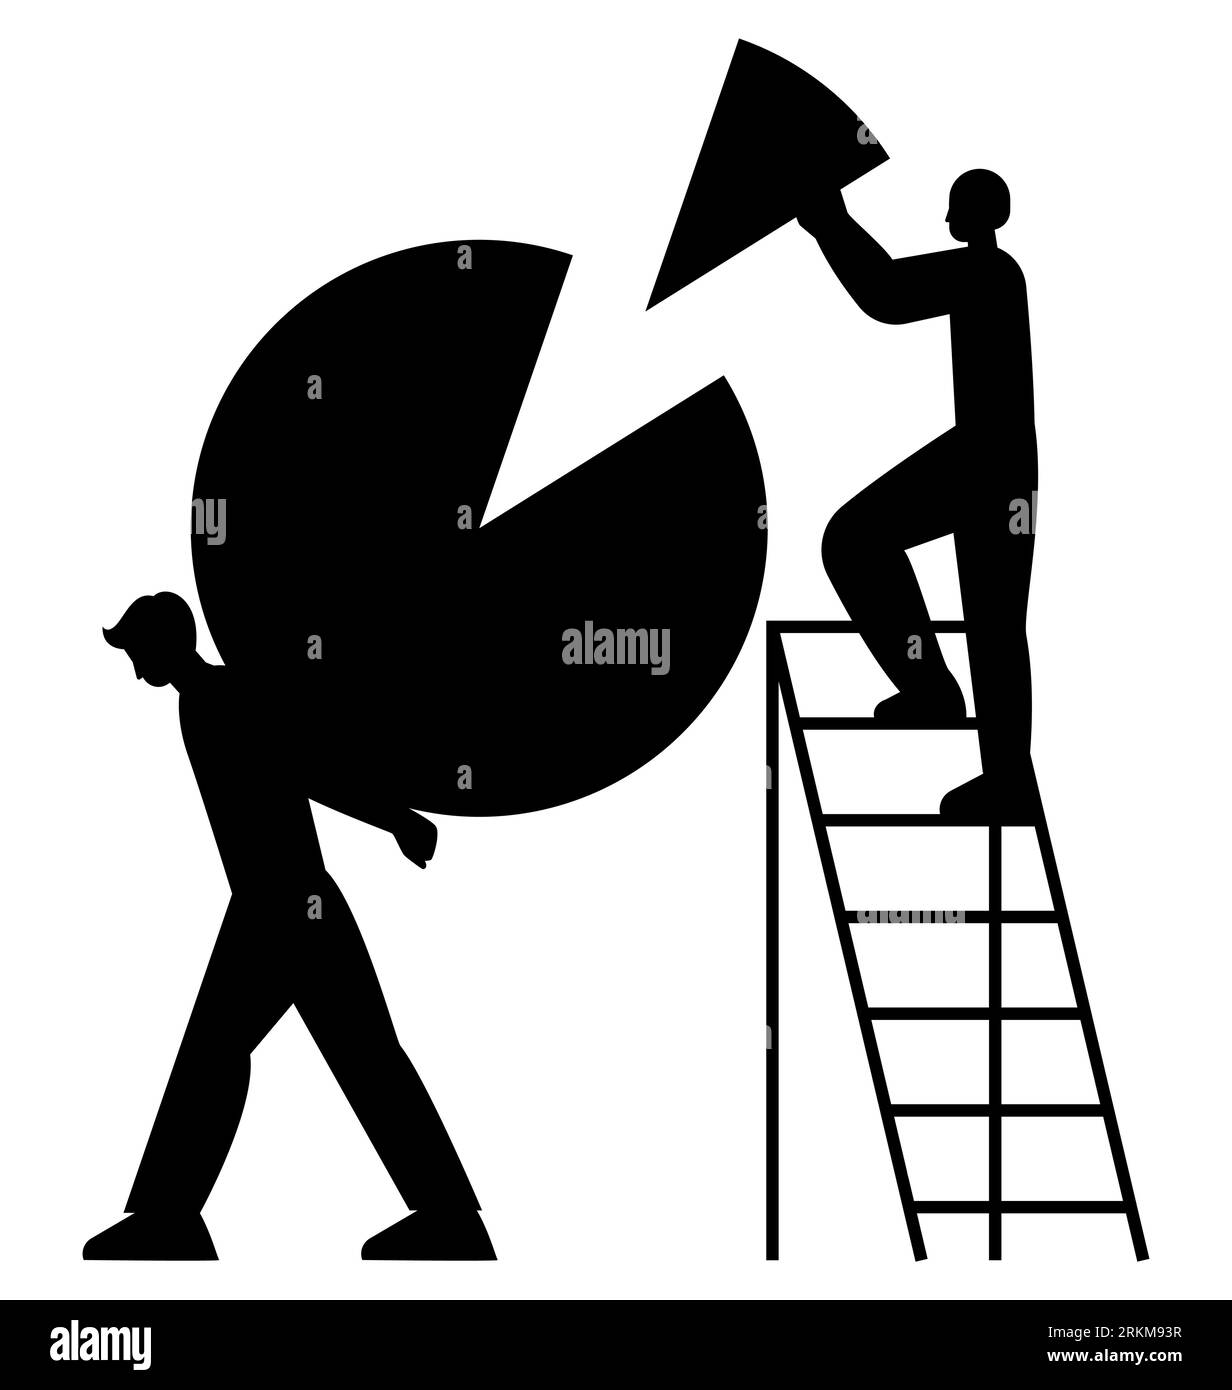 Black silhouette of colleagues with puzzle pieces, Teamwork, team building, and corporate problem-solving, brainstorming unique ideas and skills Stock Vector